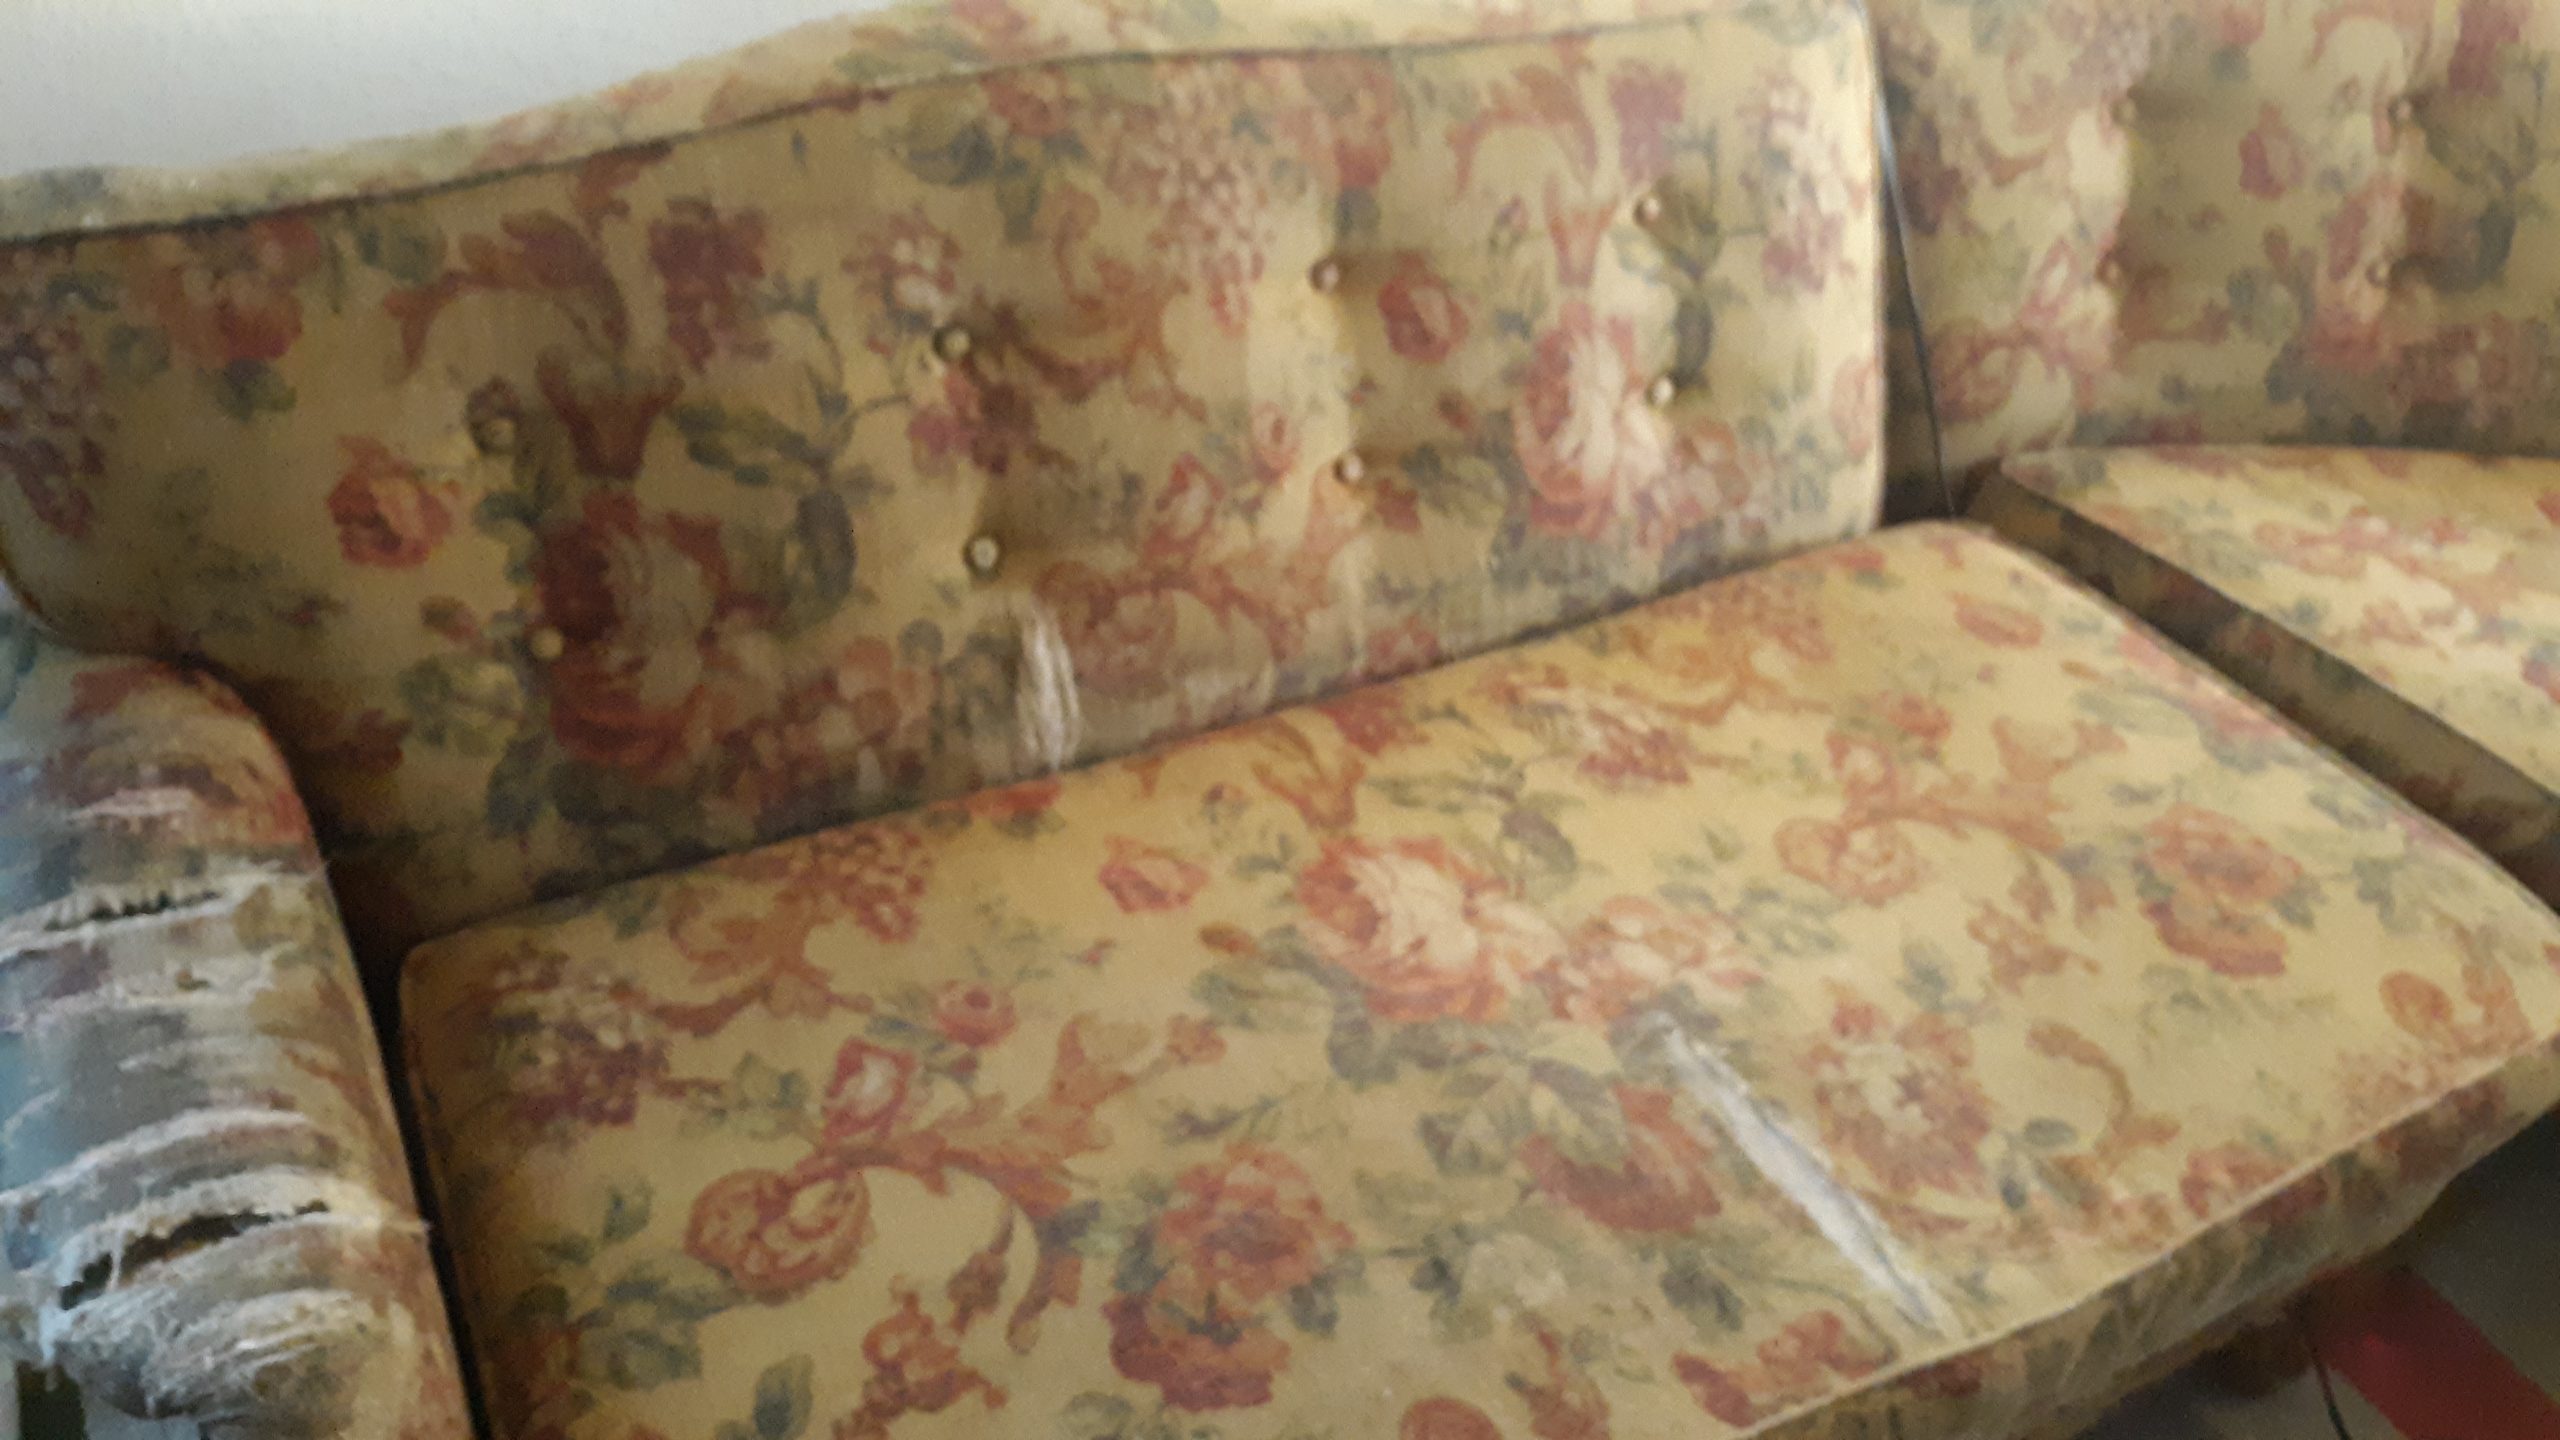 ripped vintage floral couch